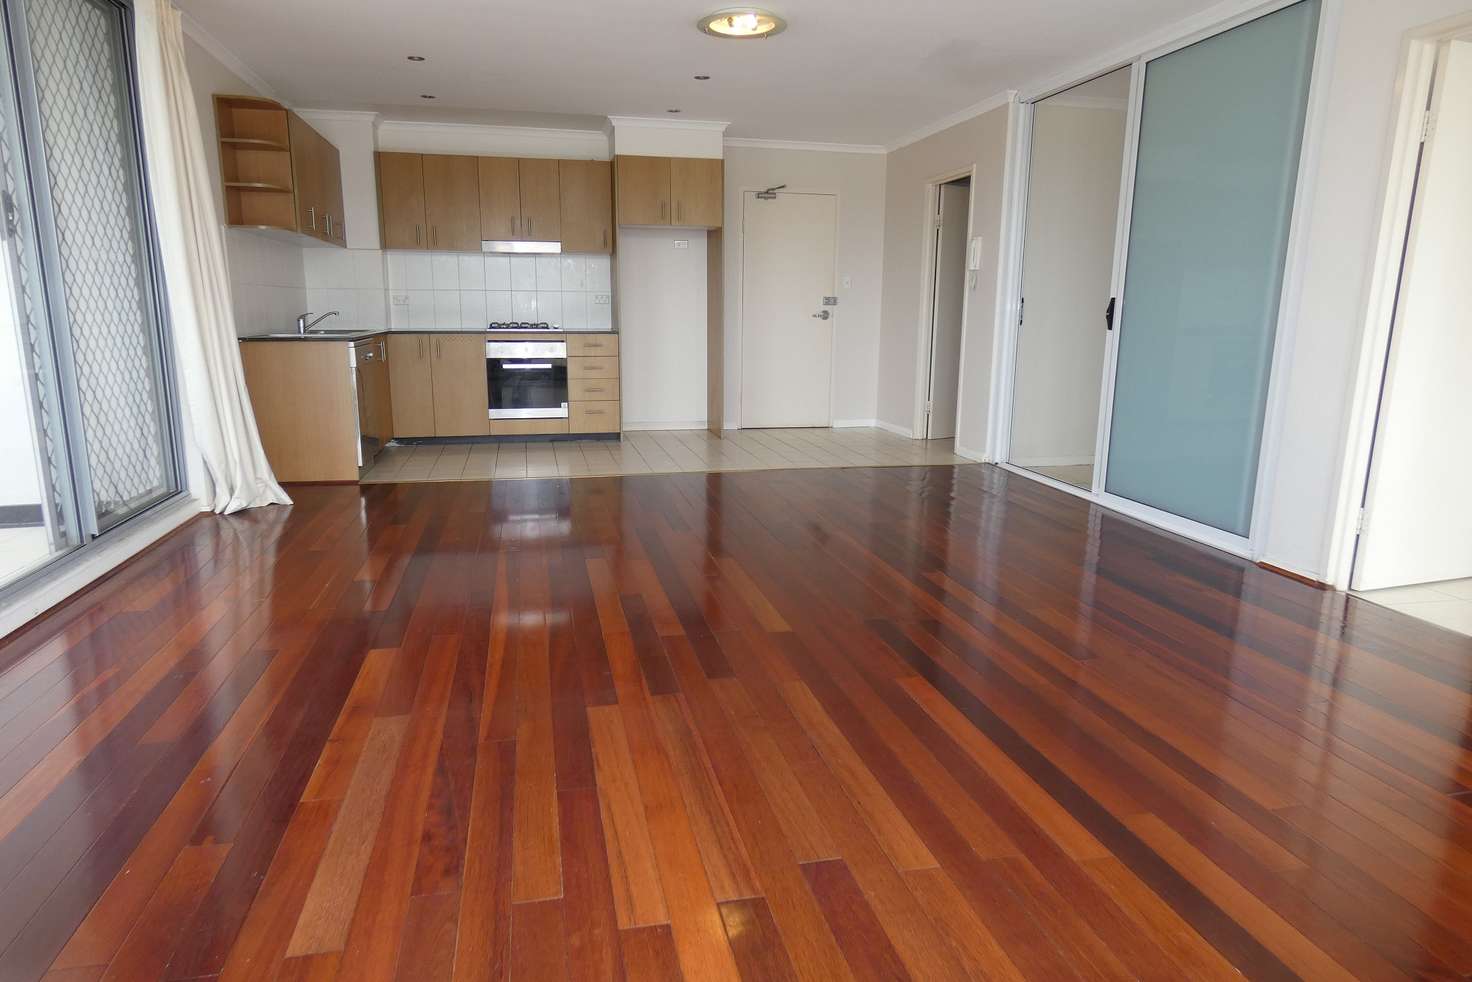 Main view of Homely apartment listing, 621/3 Larkin Street, Camperdown NSW 2050